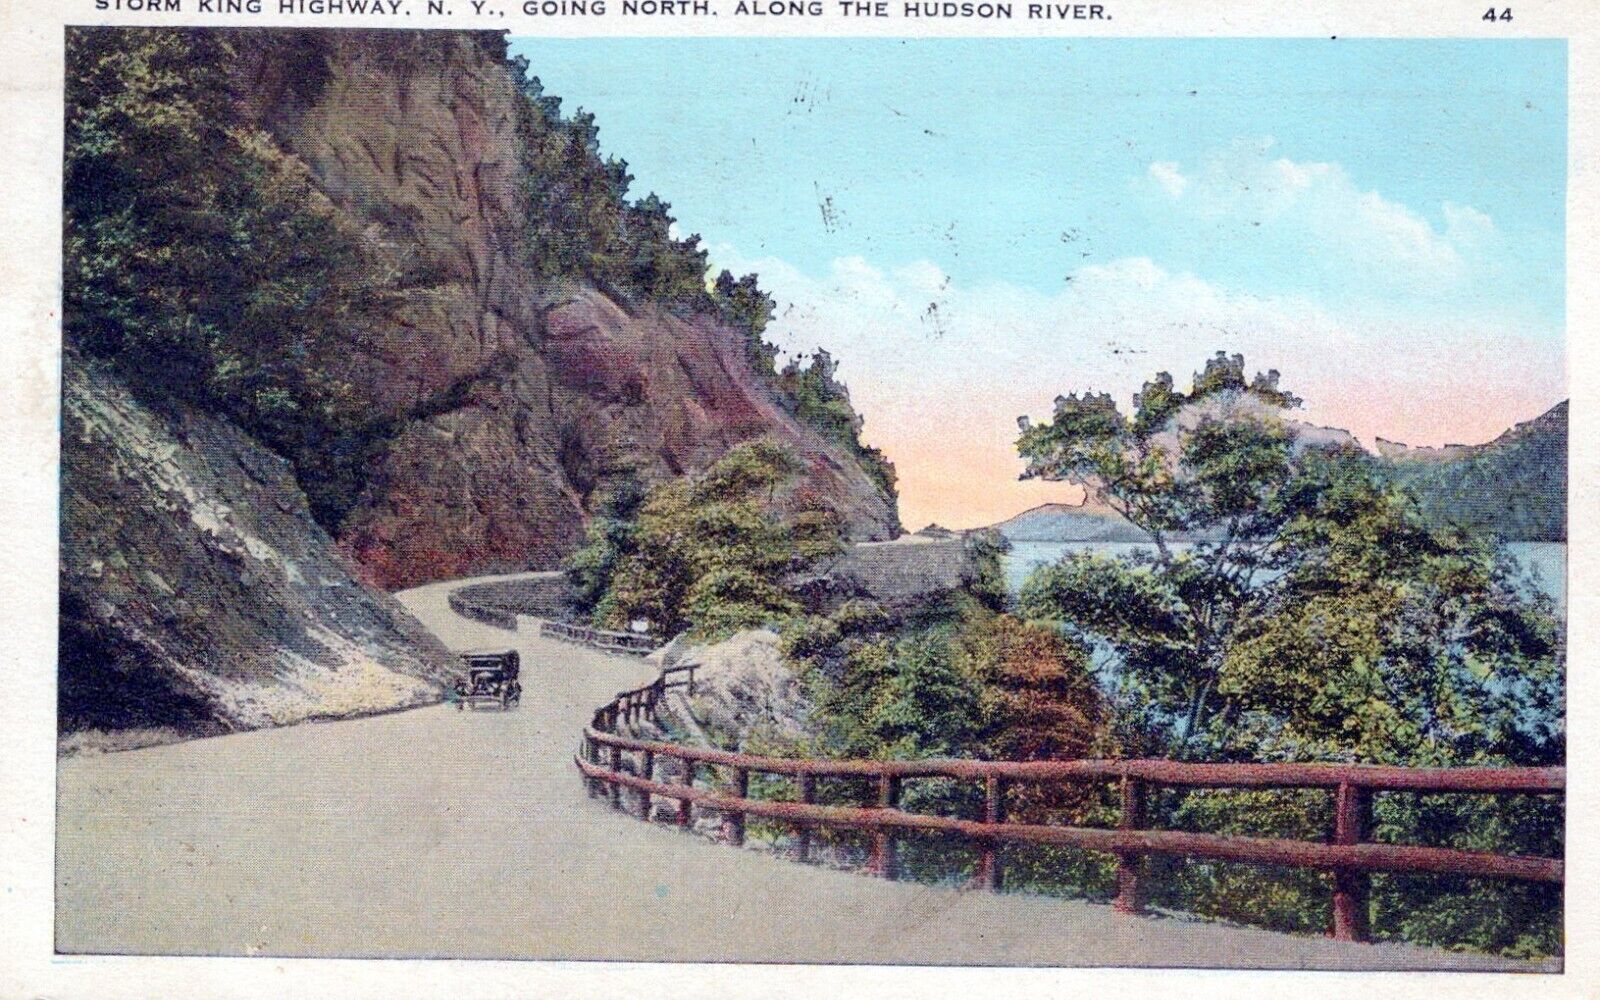 Storm King Highway New York Going North Along the Hudson River Car 1926 Postcard